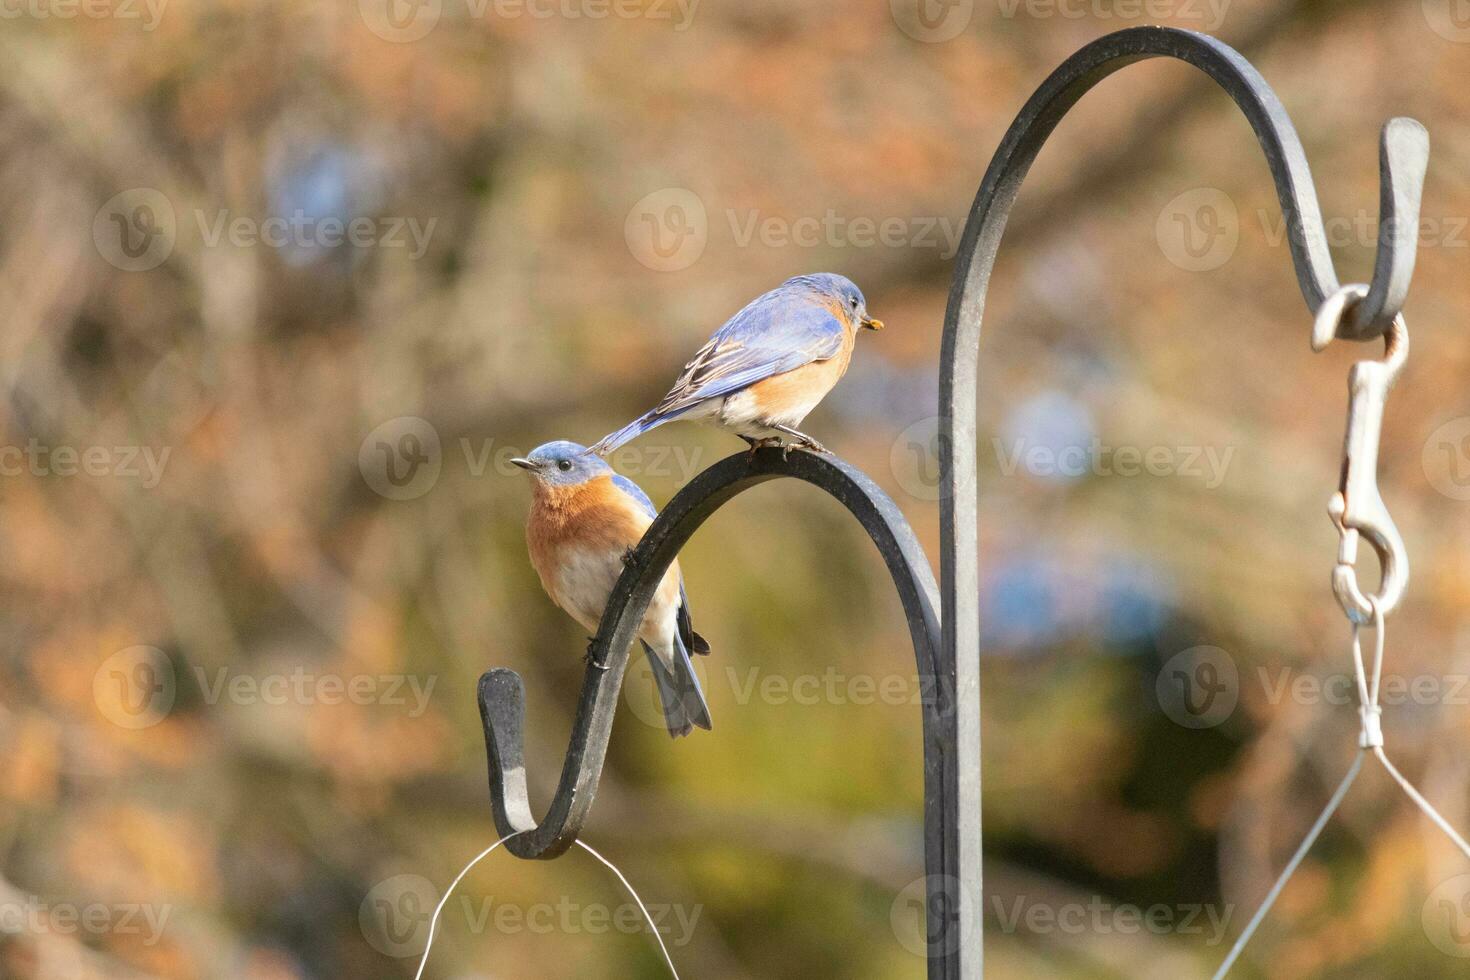 These two cute bluebirds came out to the shepherds hook. They look to be enjoying each others company. A meeting of two birds out together. The pretty rusty orange bellies with blue top feathers. photo